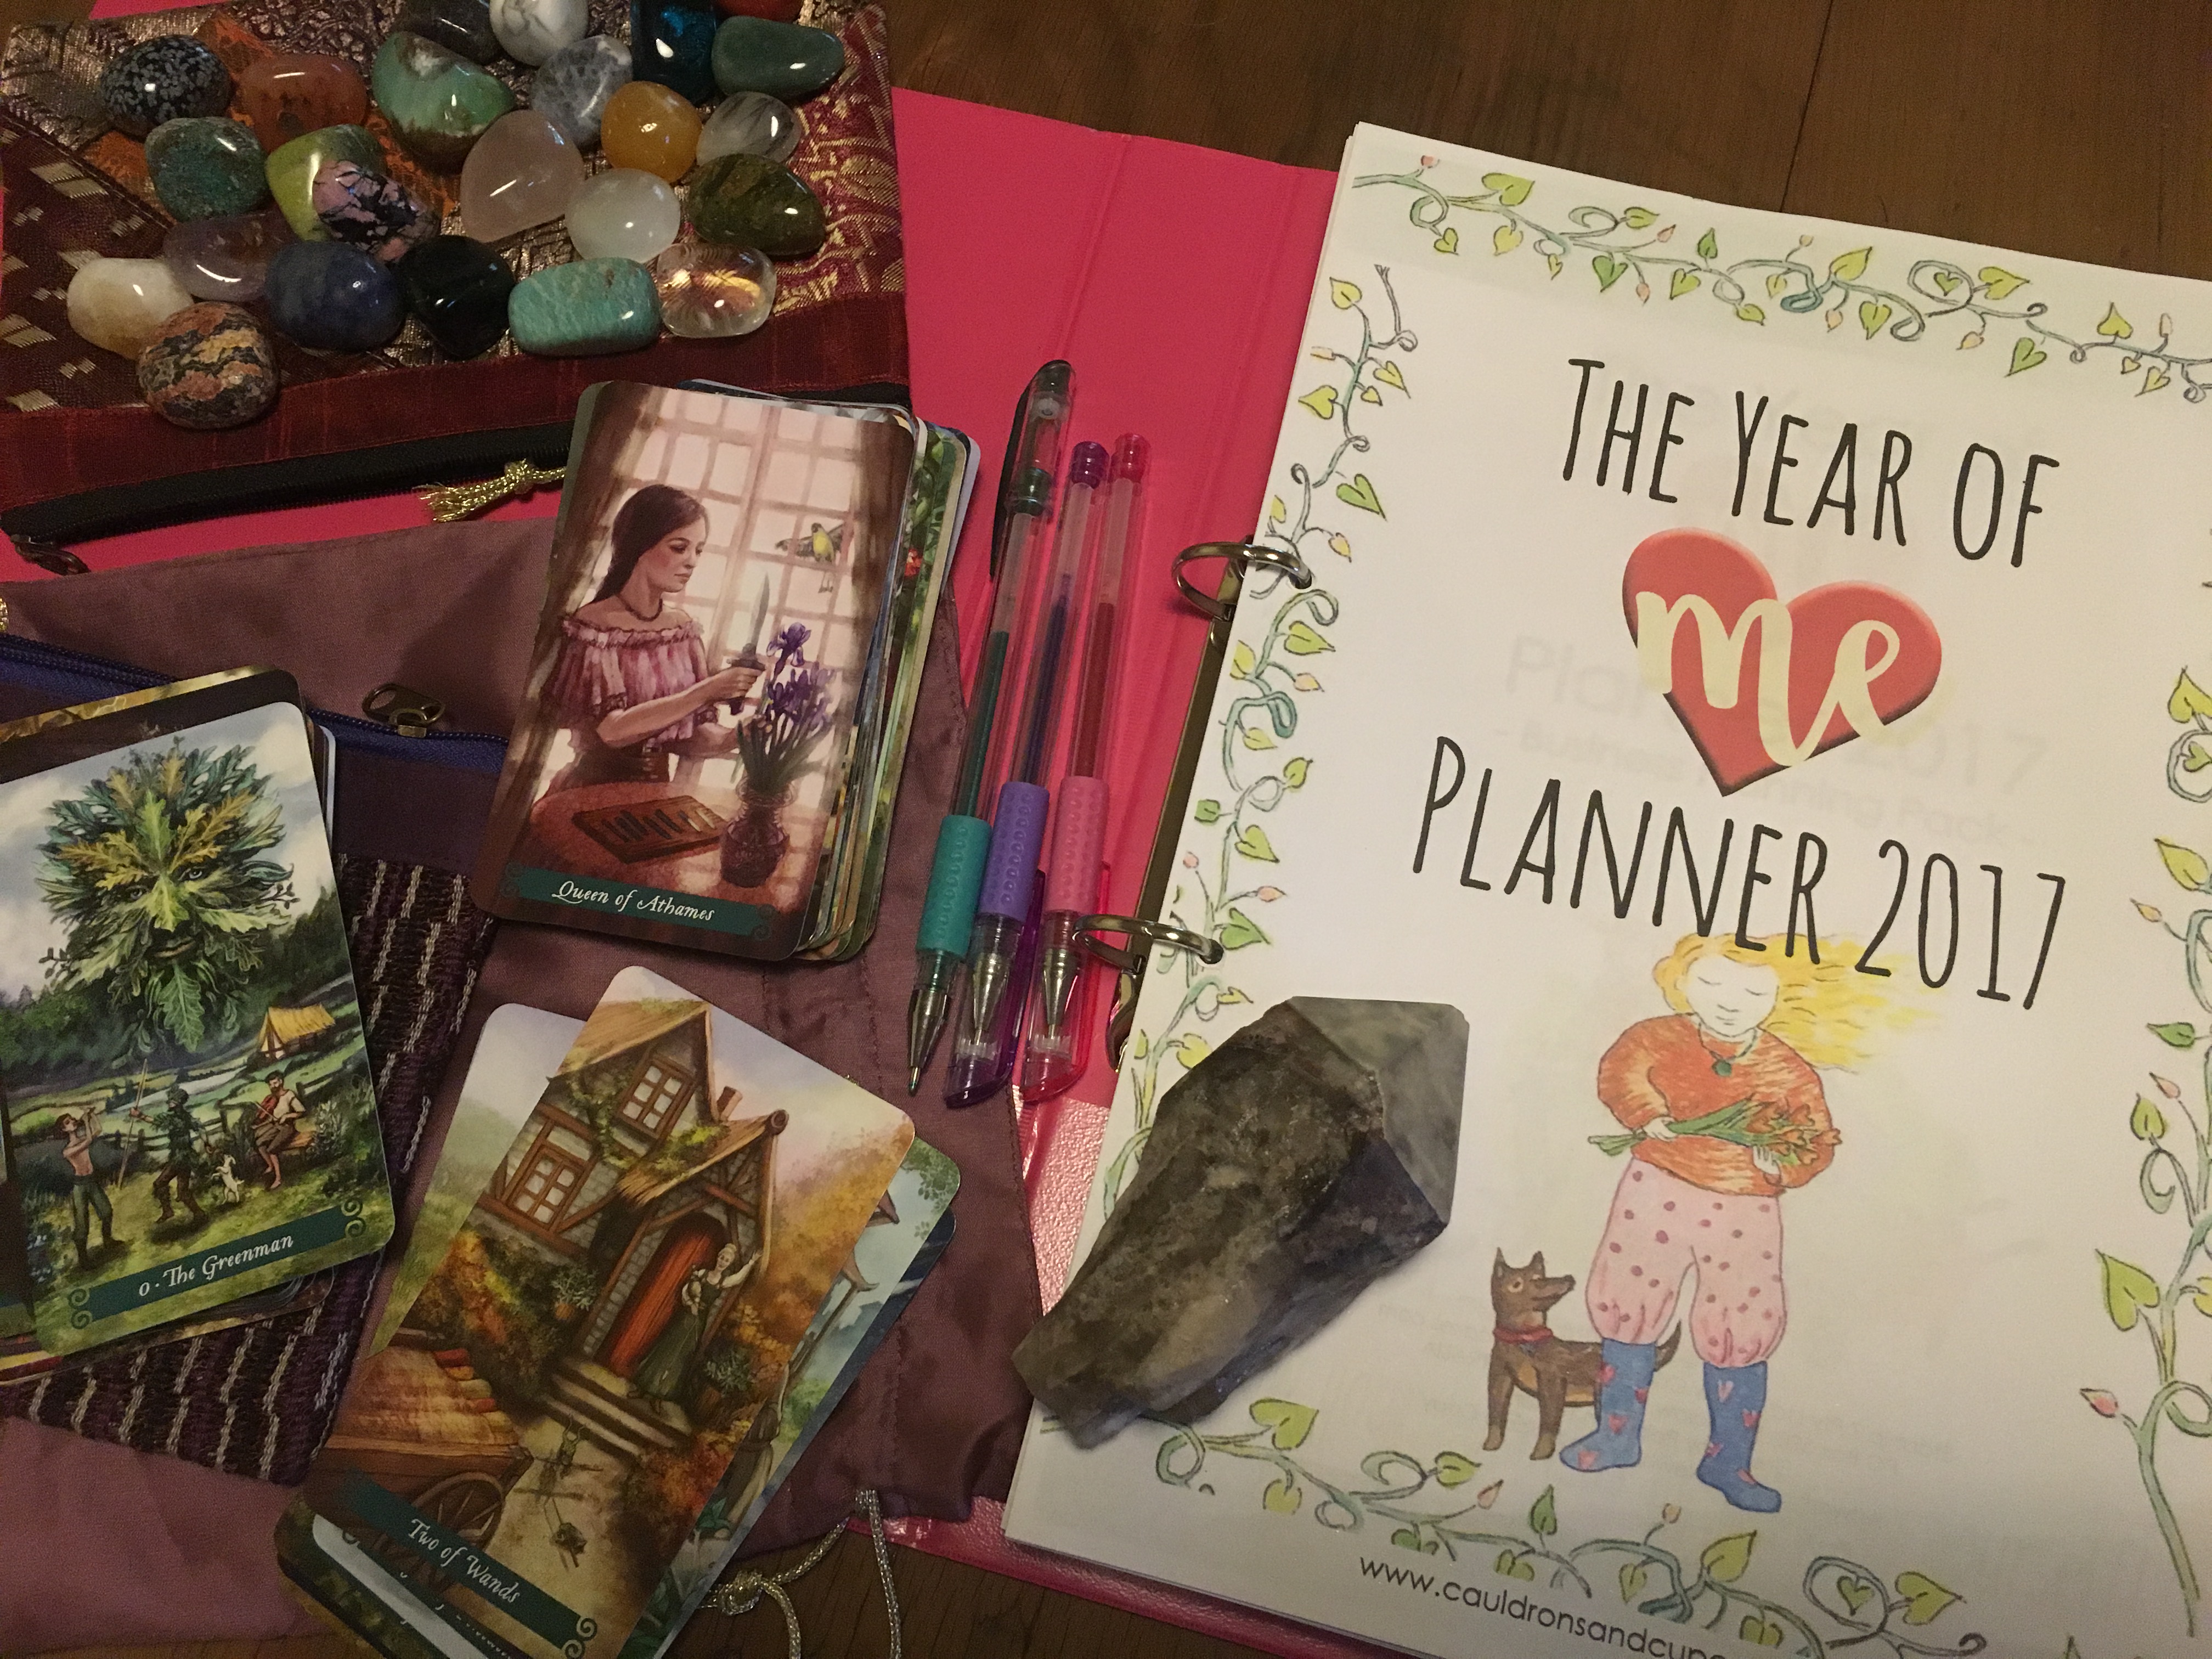 Here's my own 2017 Planner, and my 2017 gratitude stone, my 2017 crystal pack, and the oracle cards I'm going to use for the year ahead. Pretty delicious, huh?